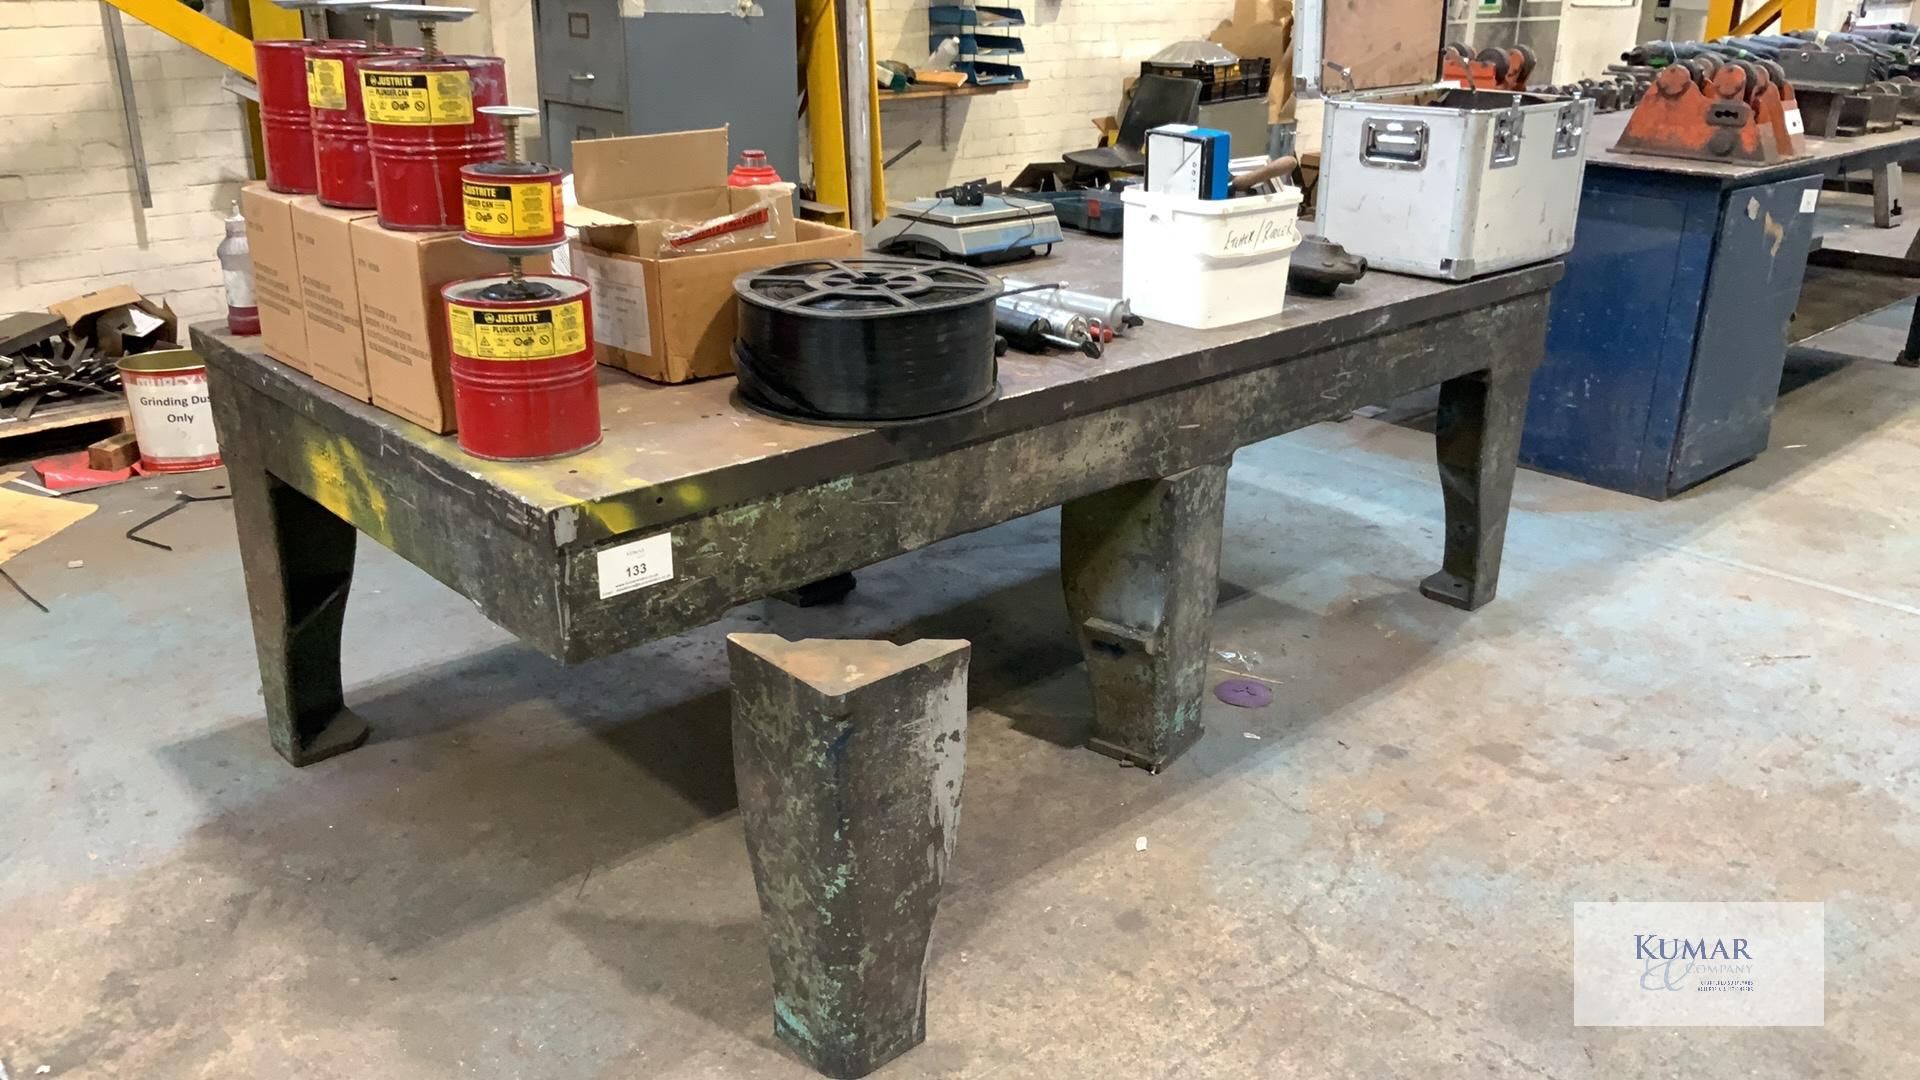 Webster & BennettLarge Welding Table - Dimensions 247cm x 122cm x 80cm Height - Please Note Does Not - Bild 2 aus 7